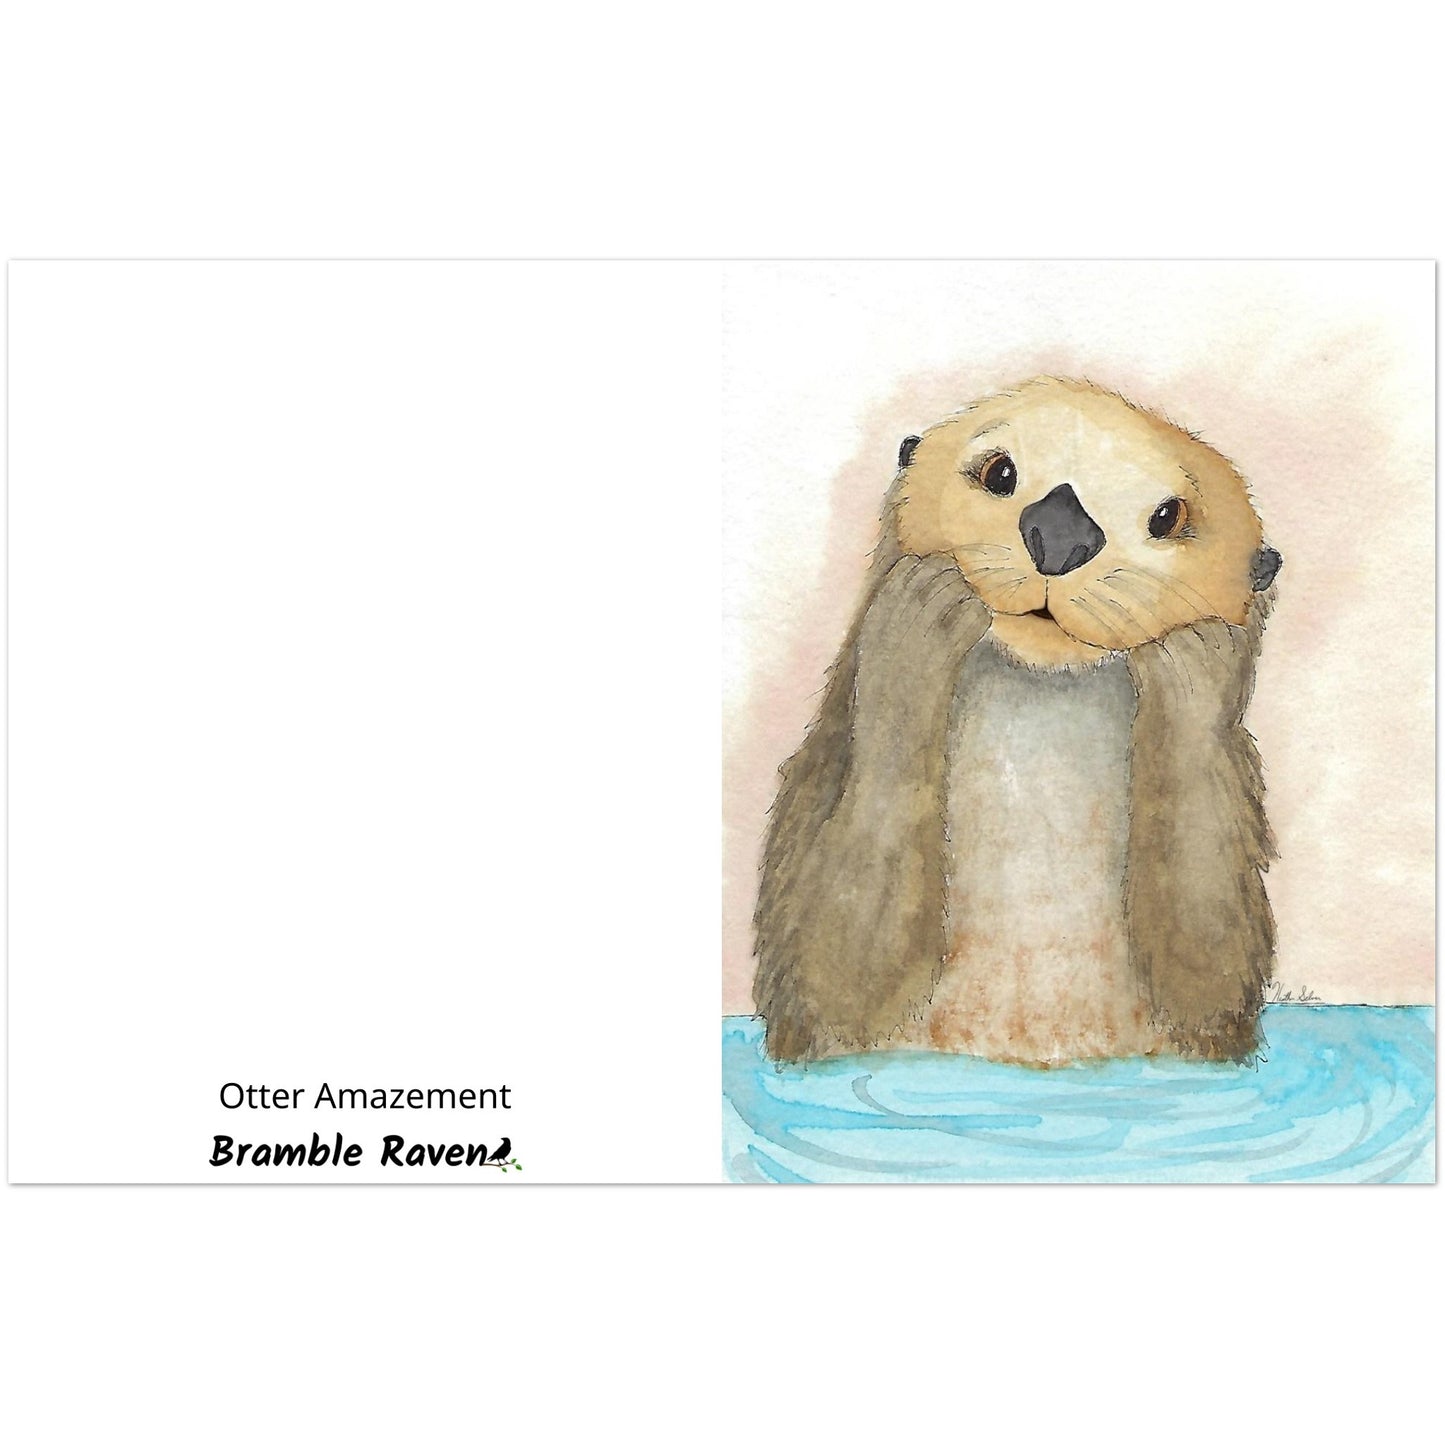 Pack of ten 4.25 x 5.5 inch greeting cards. Features watercolor print of a playful sea otter on the front. Inside is blank. Made of coated paperboard. Comes with envelopes.